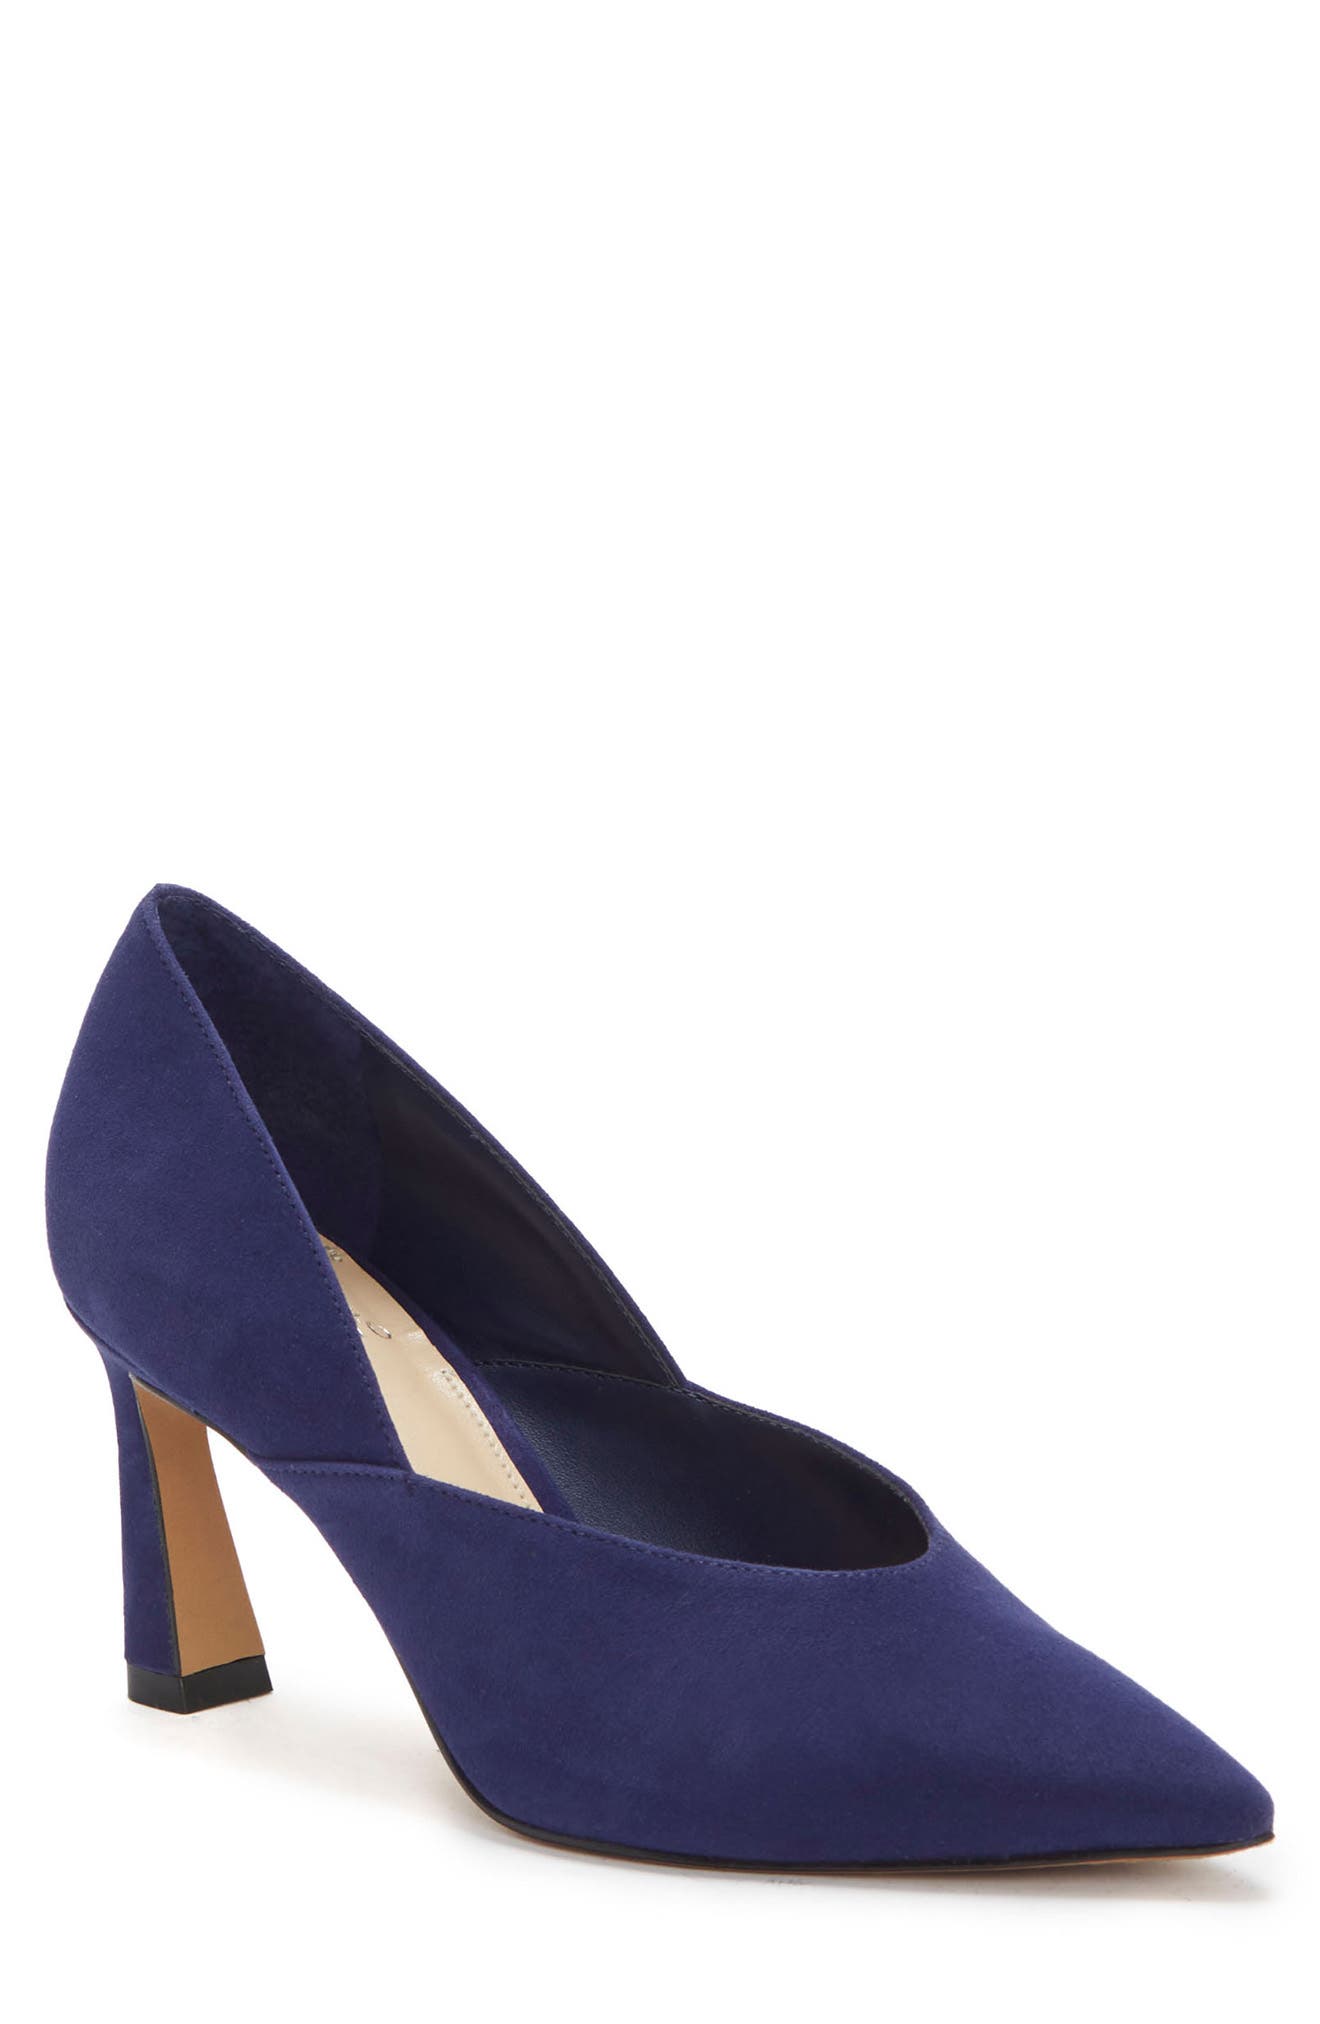 UPC 191707307452 product image for Vince Camuto Kastani Pointed Toe Pump in New Navy at Nordstrom, Size 10 | upcitemdb.com